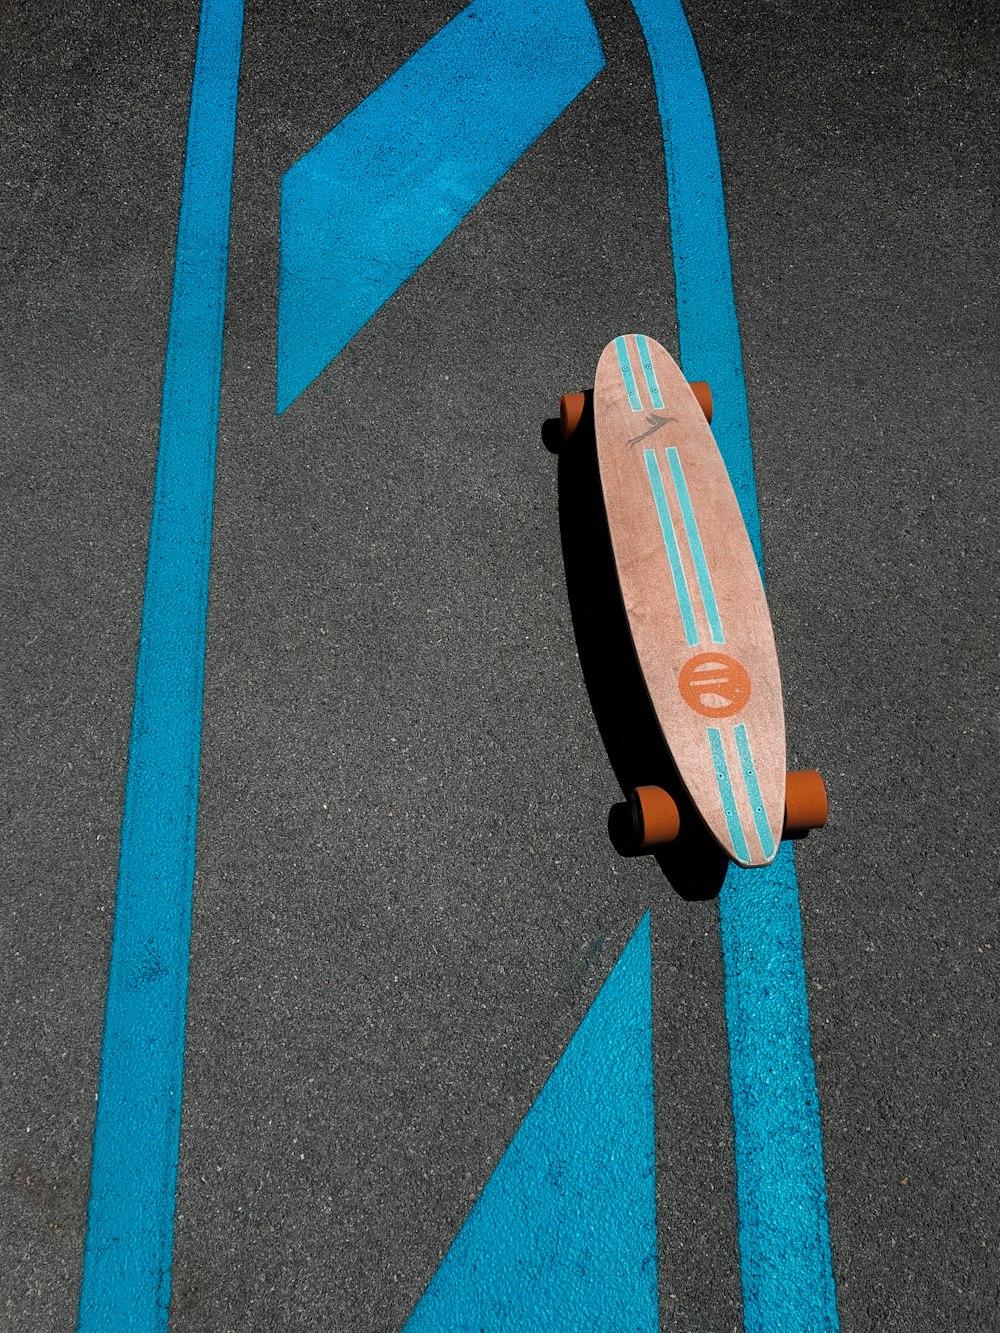 brown and orange skateboard on gray concrete road